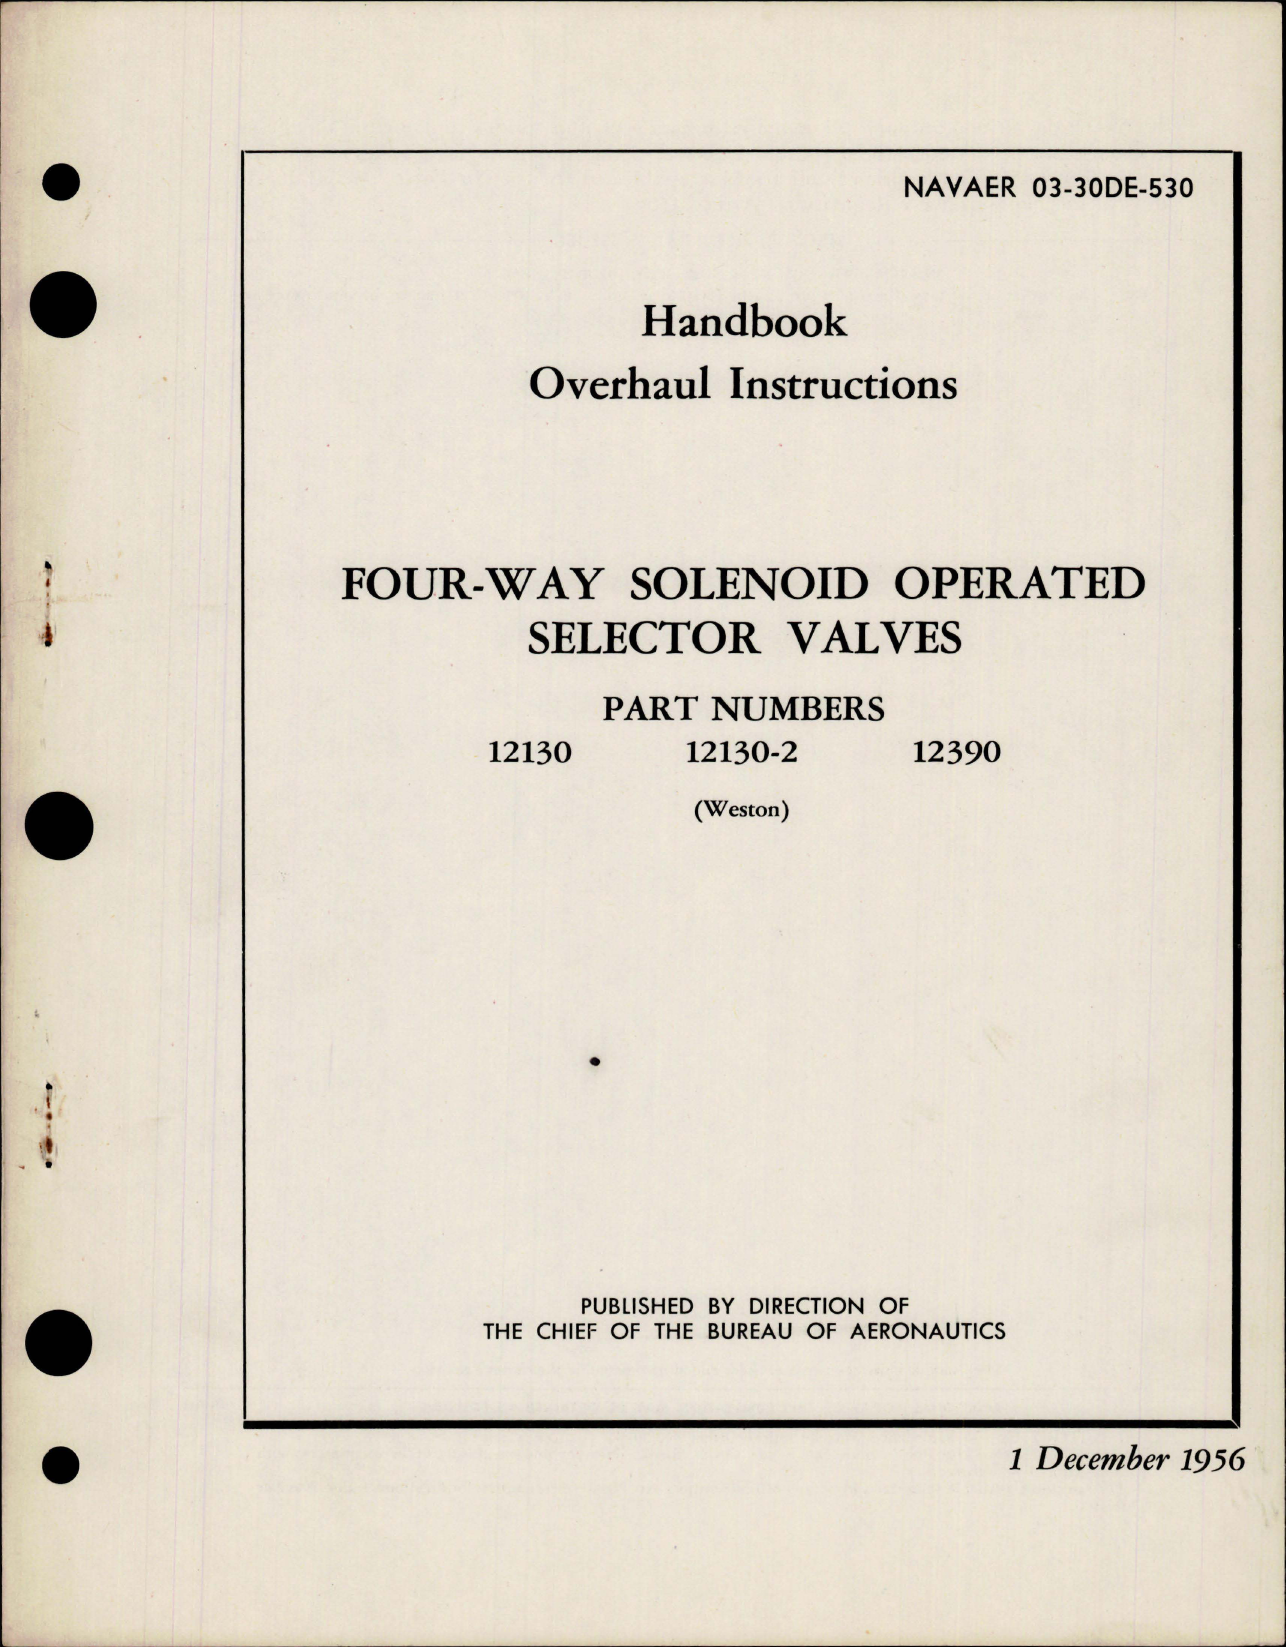 Sample page 1 from AirCorps Library document: Overhaul Instructions for Four-Way Solenoid Operated Selector Valves - Parts 12130, 12130-2, 12390